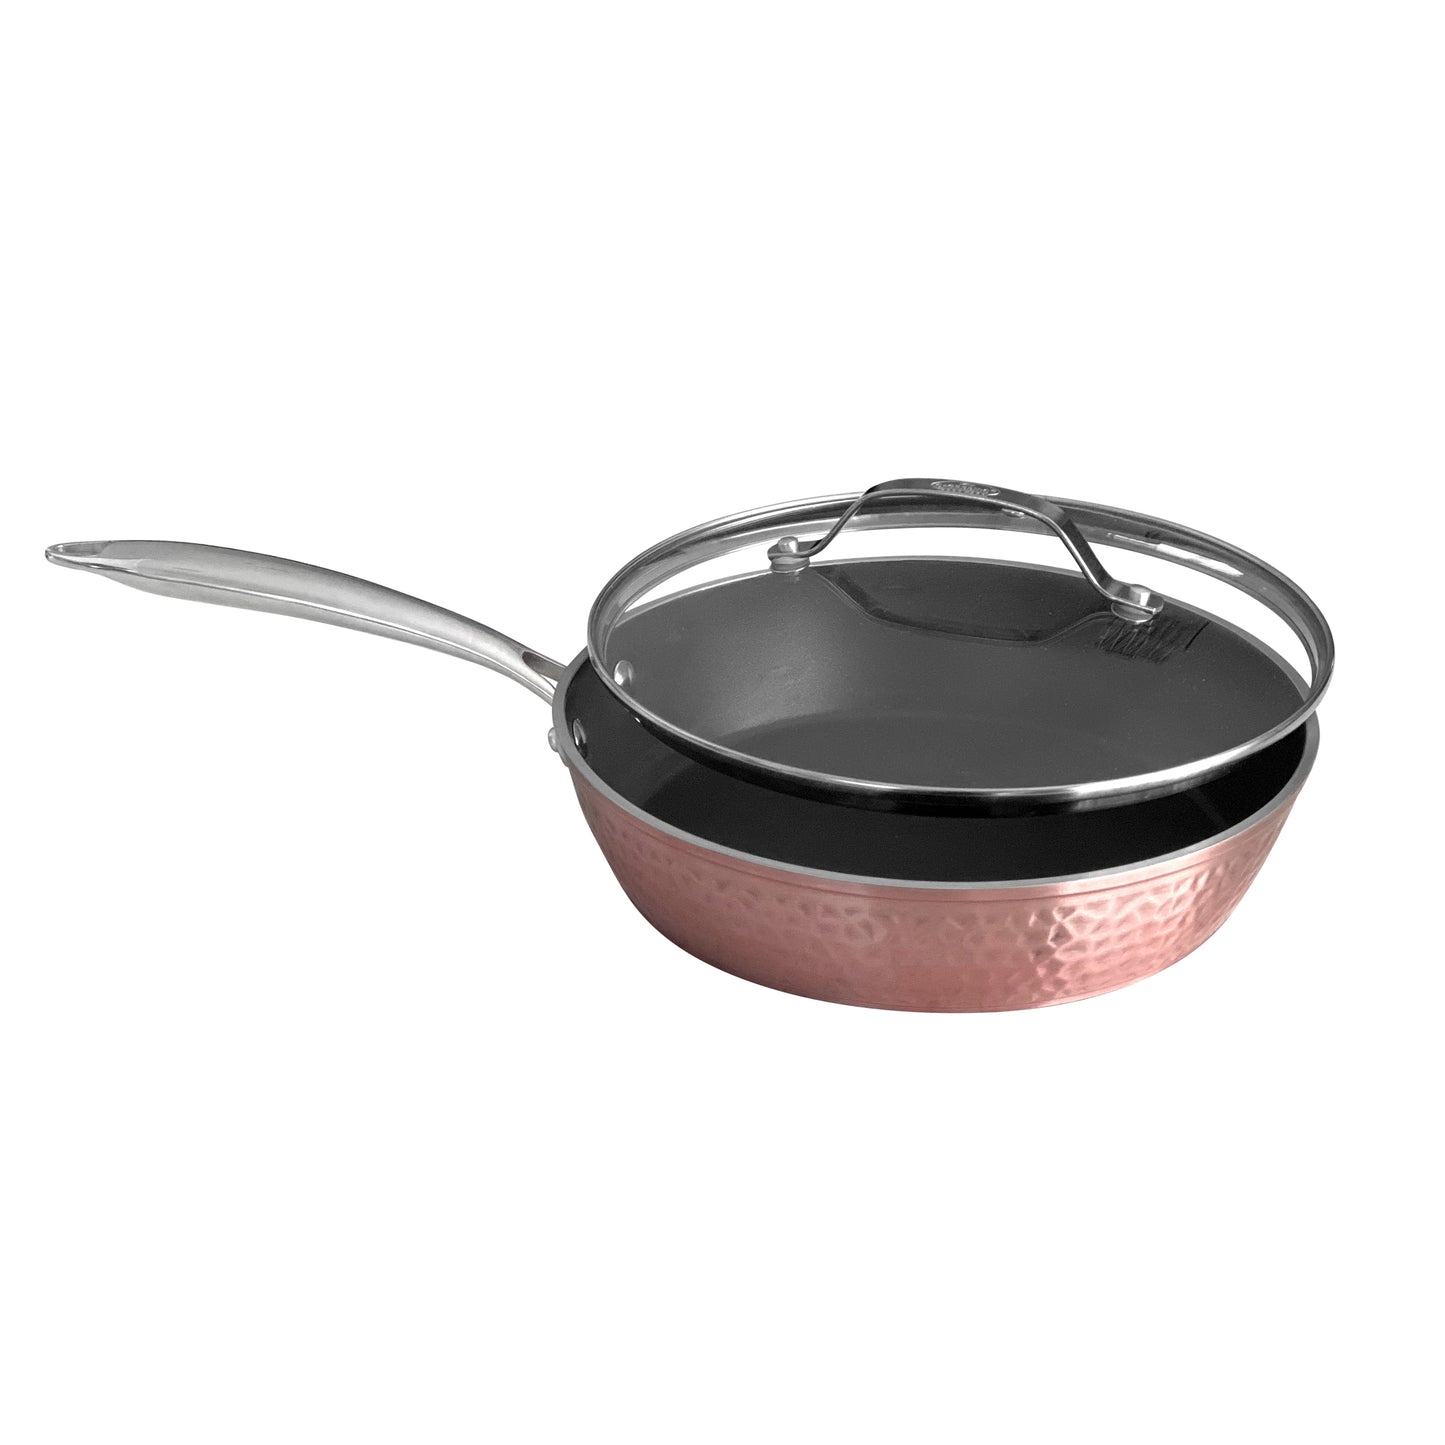 Hammered Rose Gold 8" Pan with Glass Lid